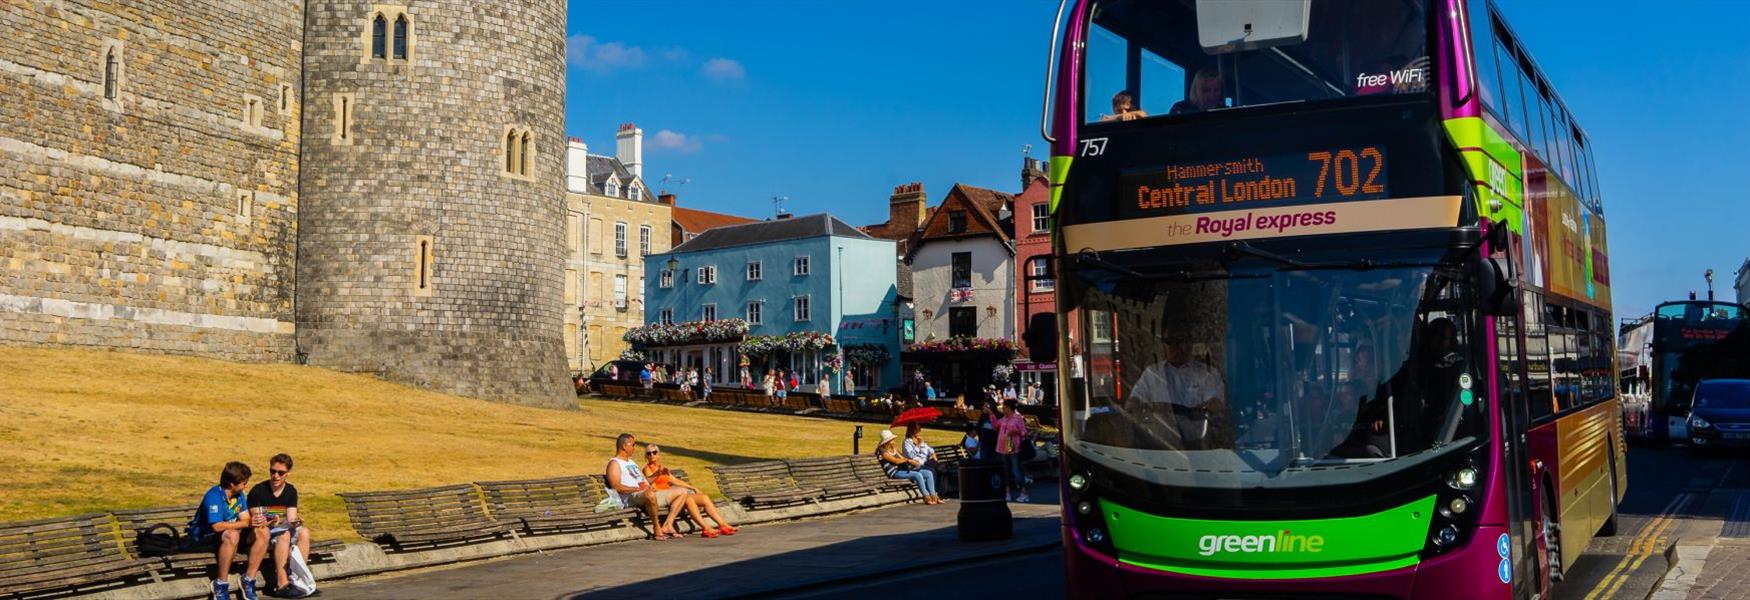 Travelling By Bus & Coach - Visit Windsor